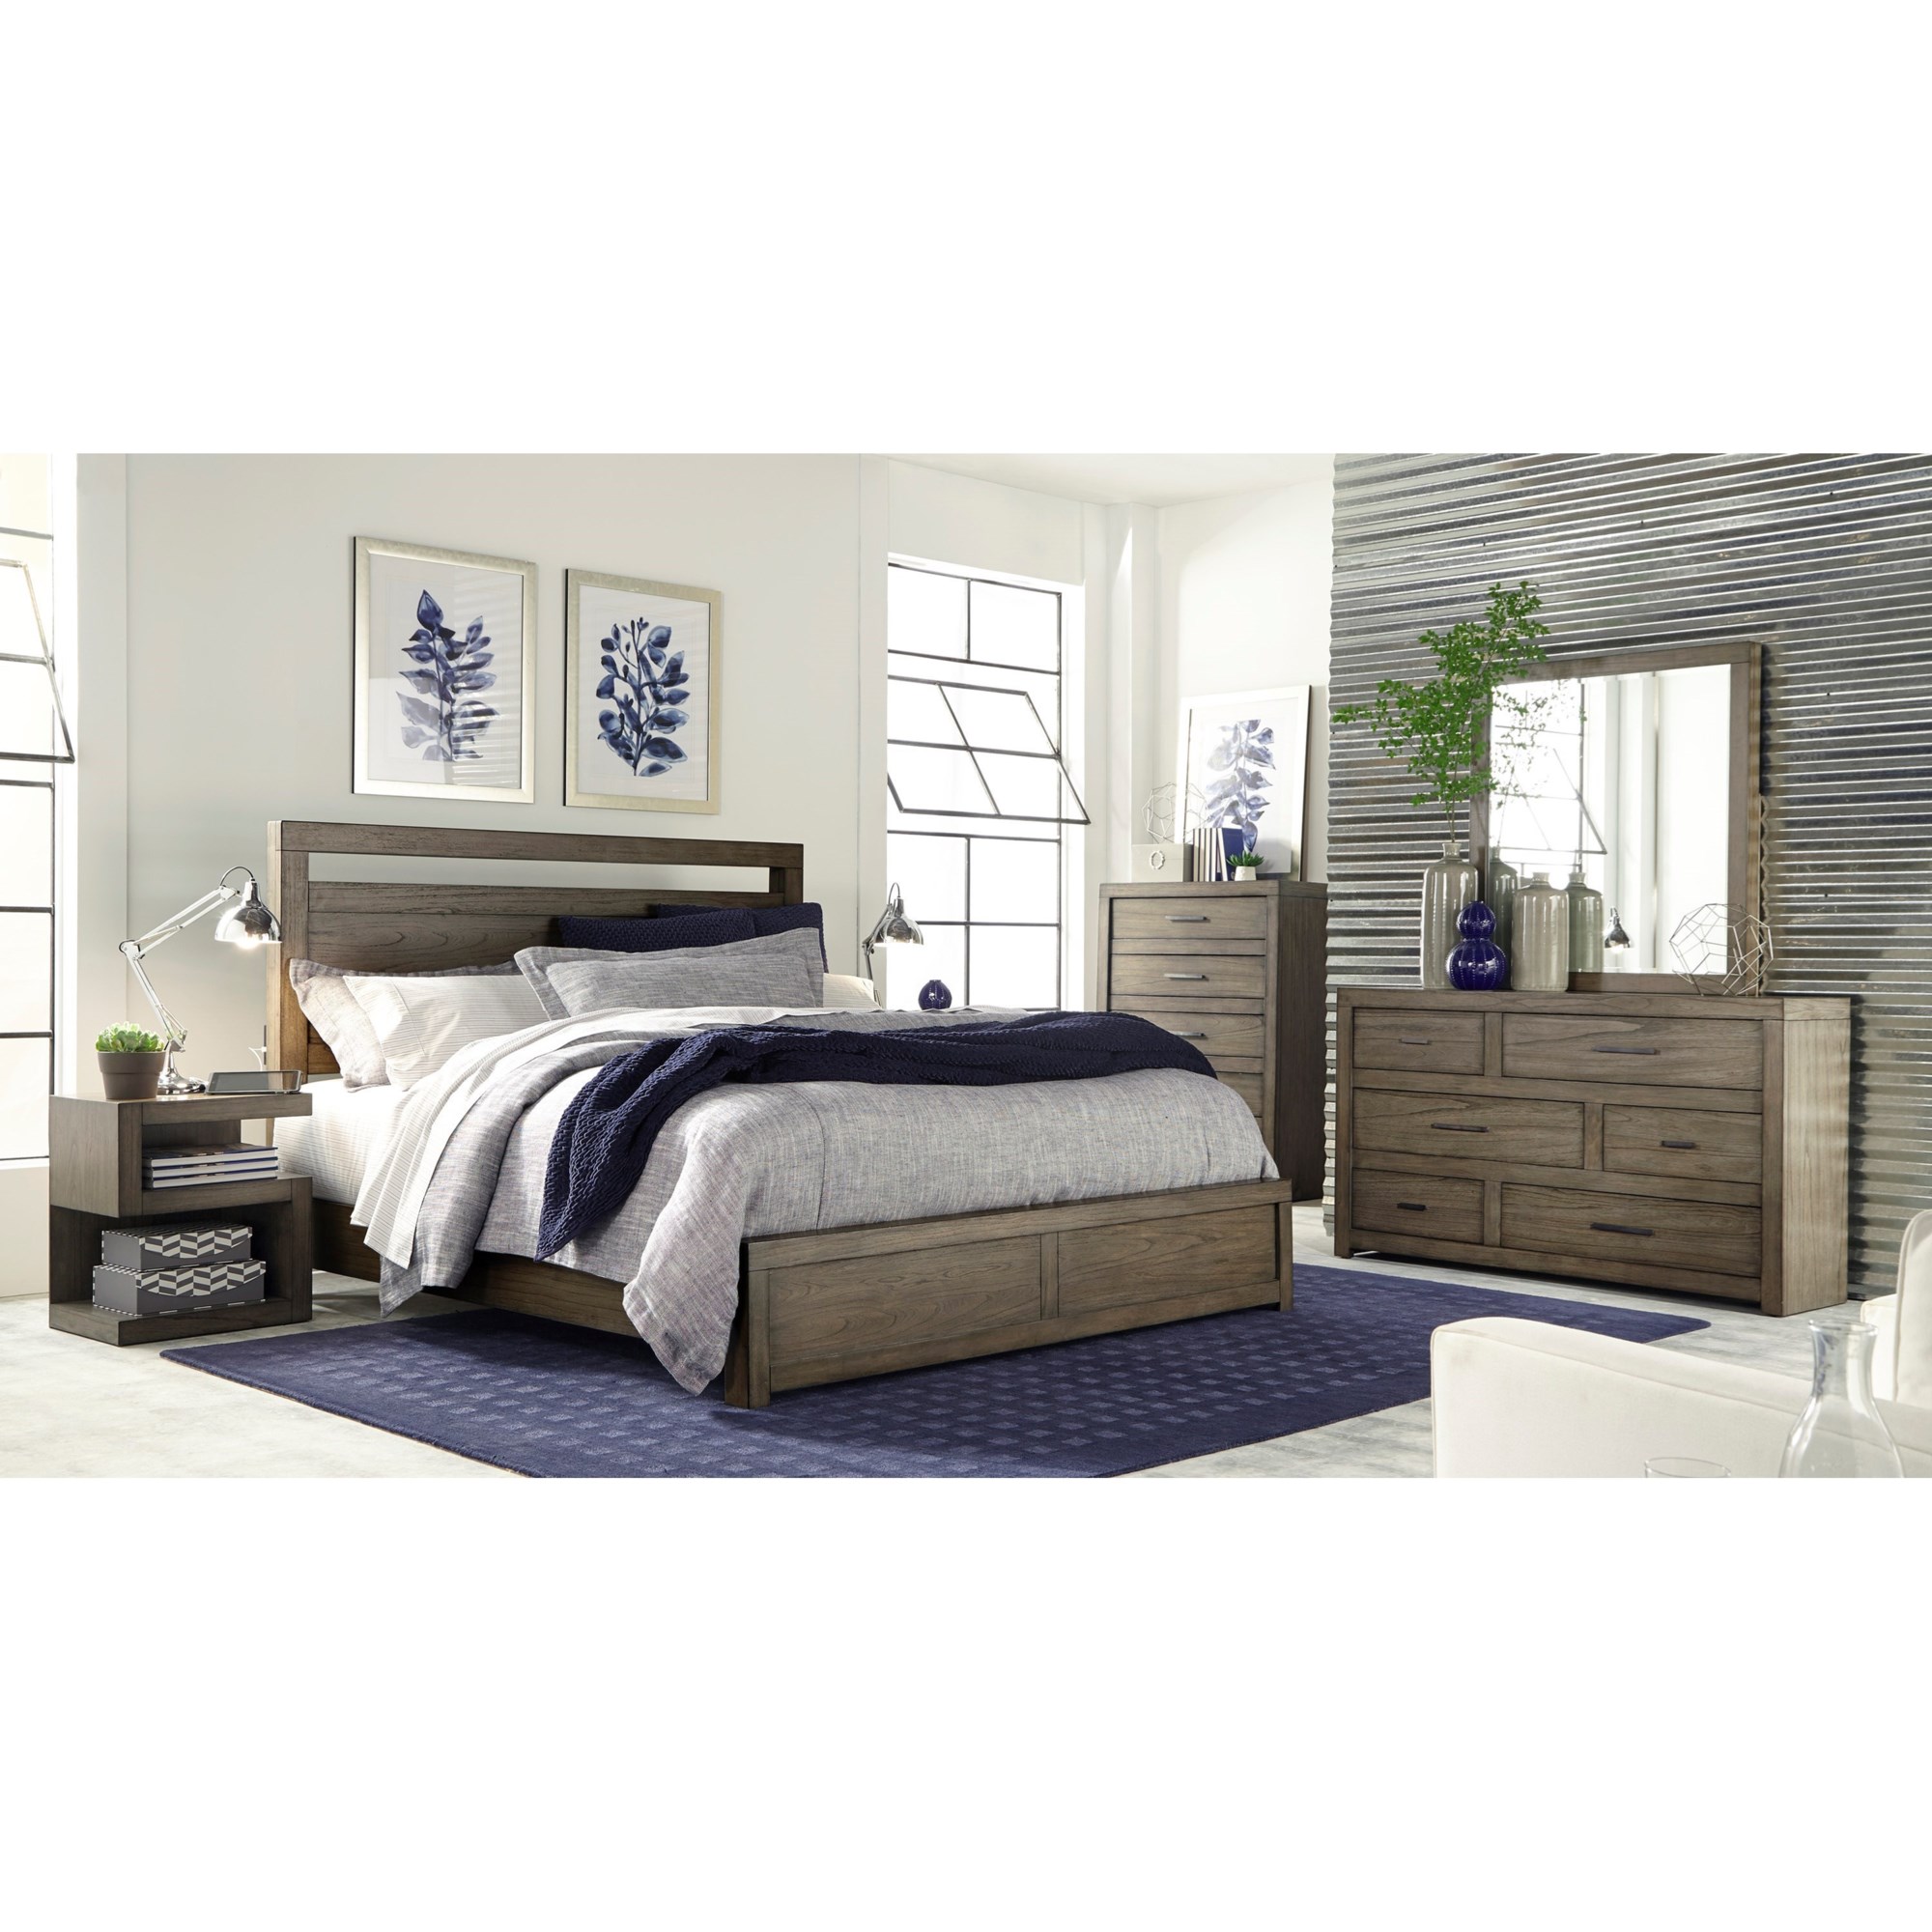 Modern Style Fabric Queen Bed Frame French Style Bedroom Furniture